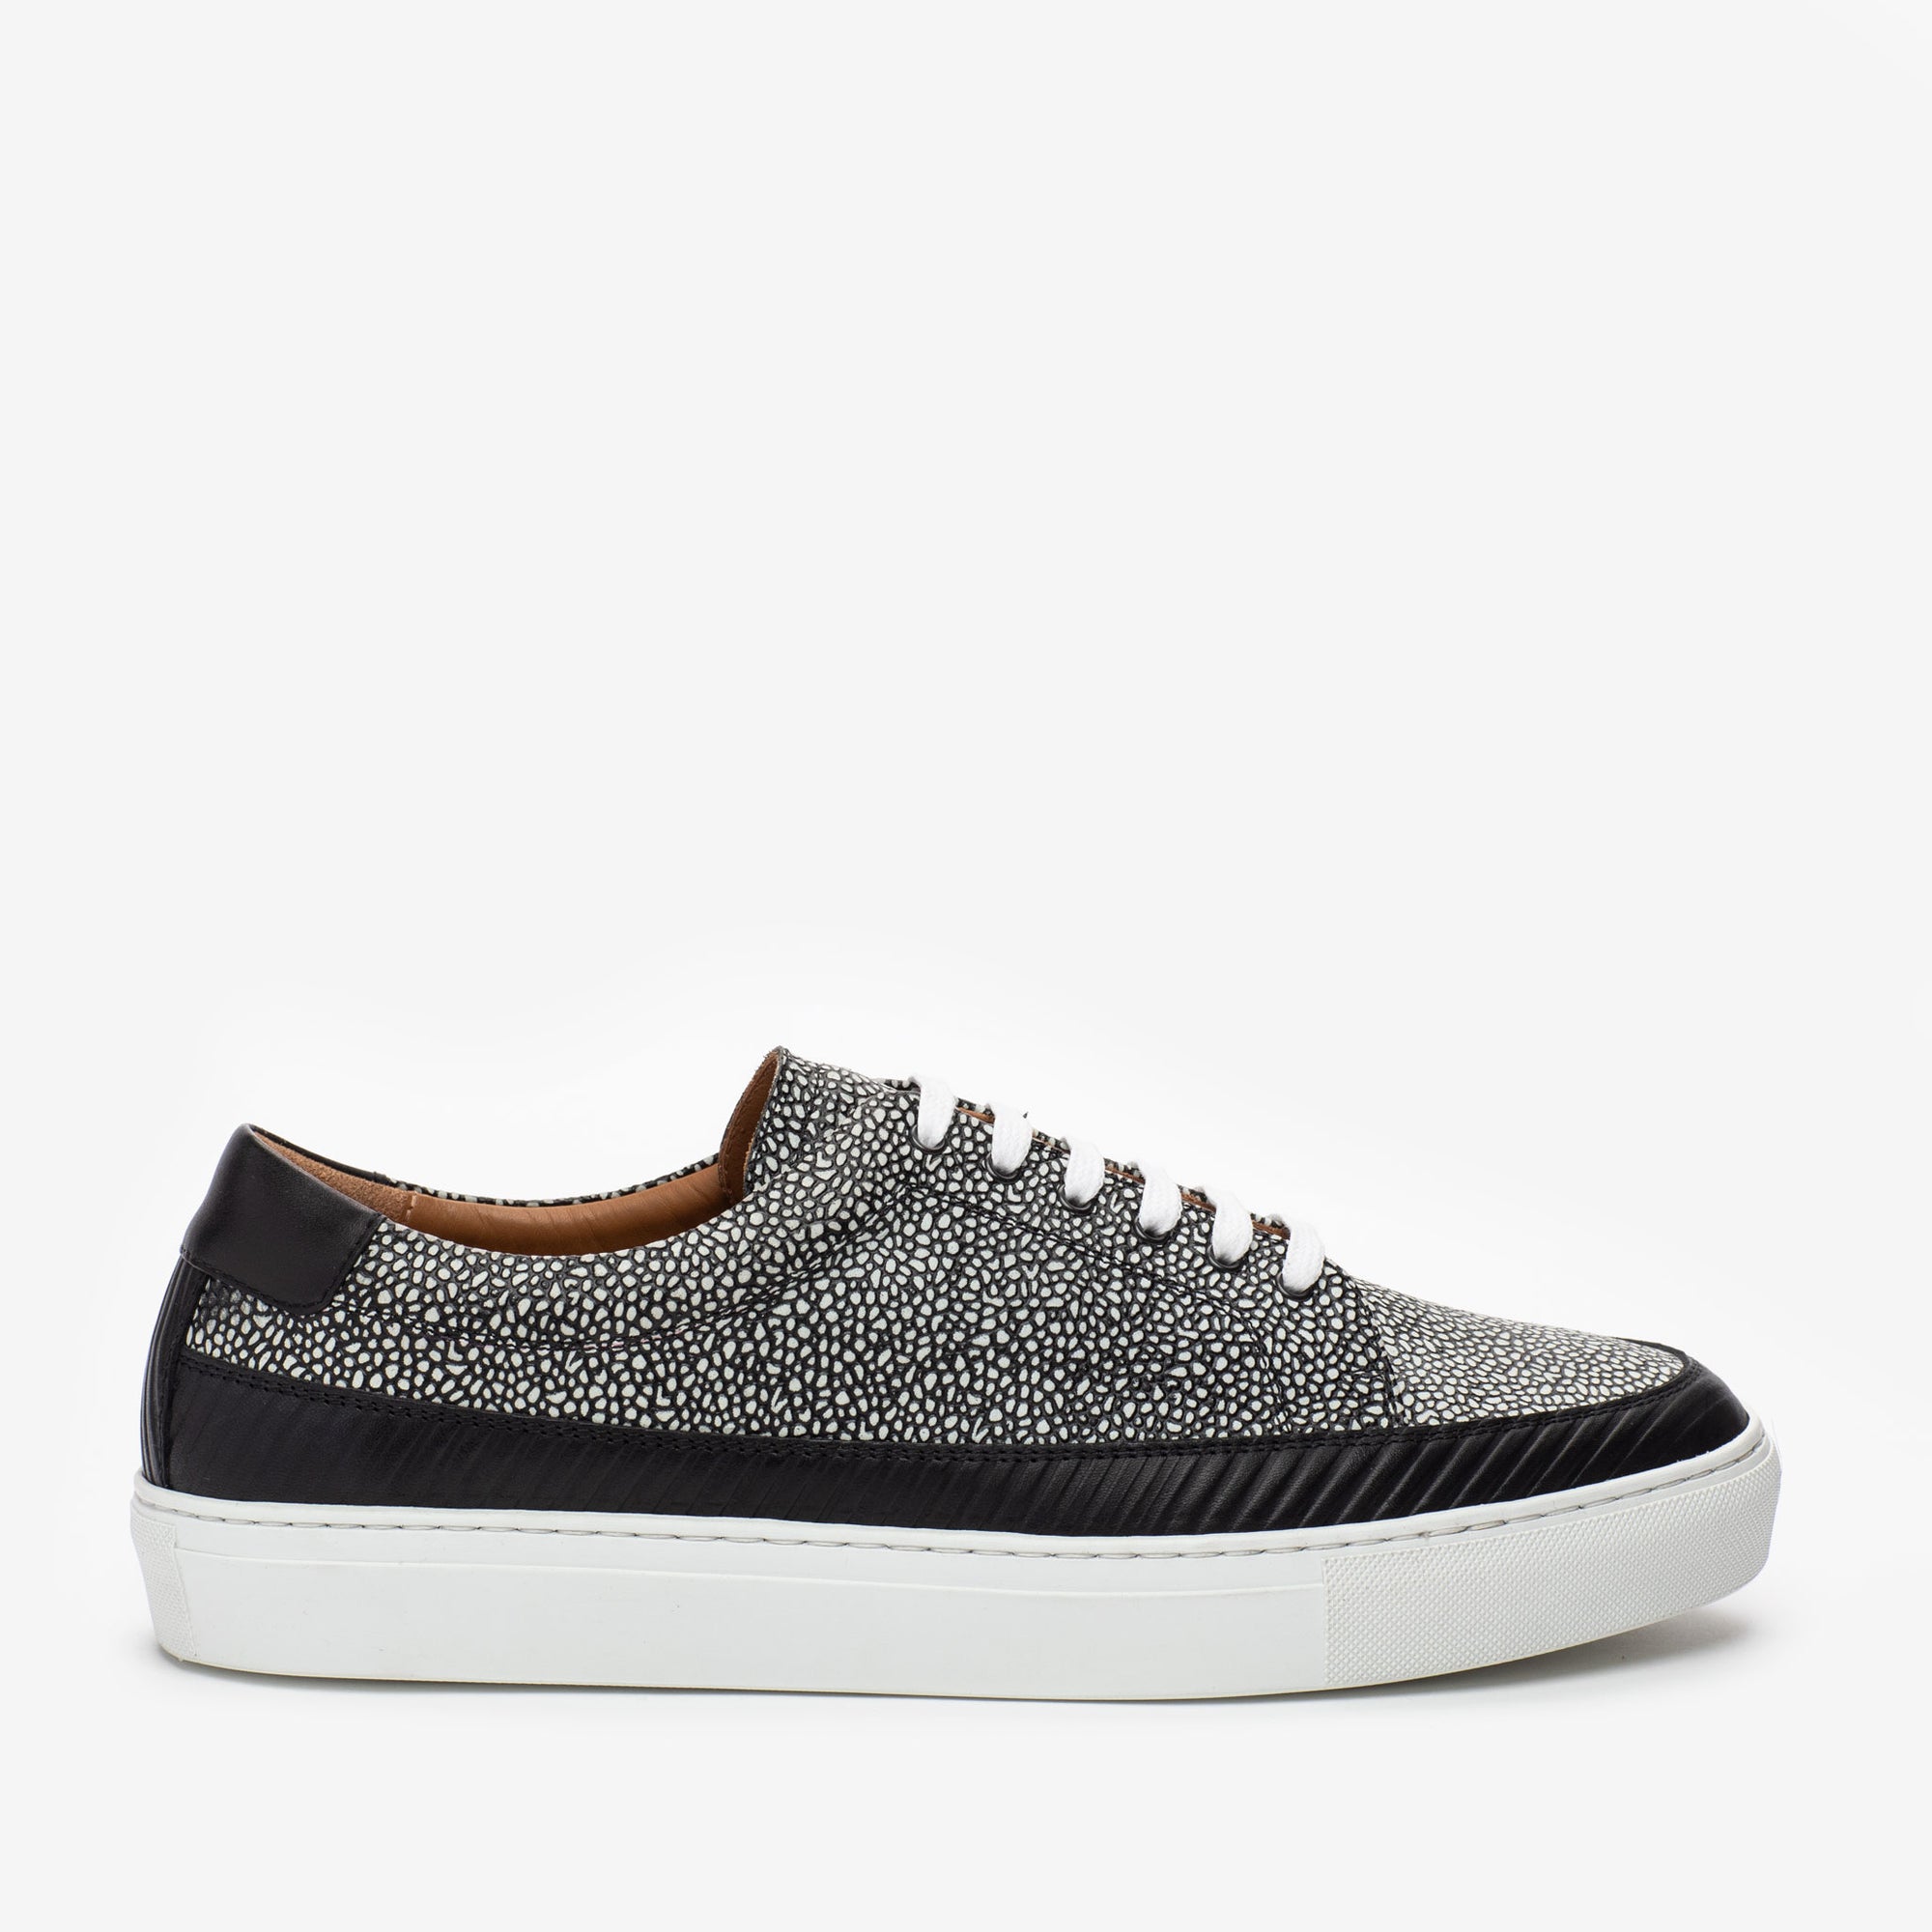 The Fifth Ave Sneaker in Stone